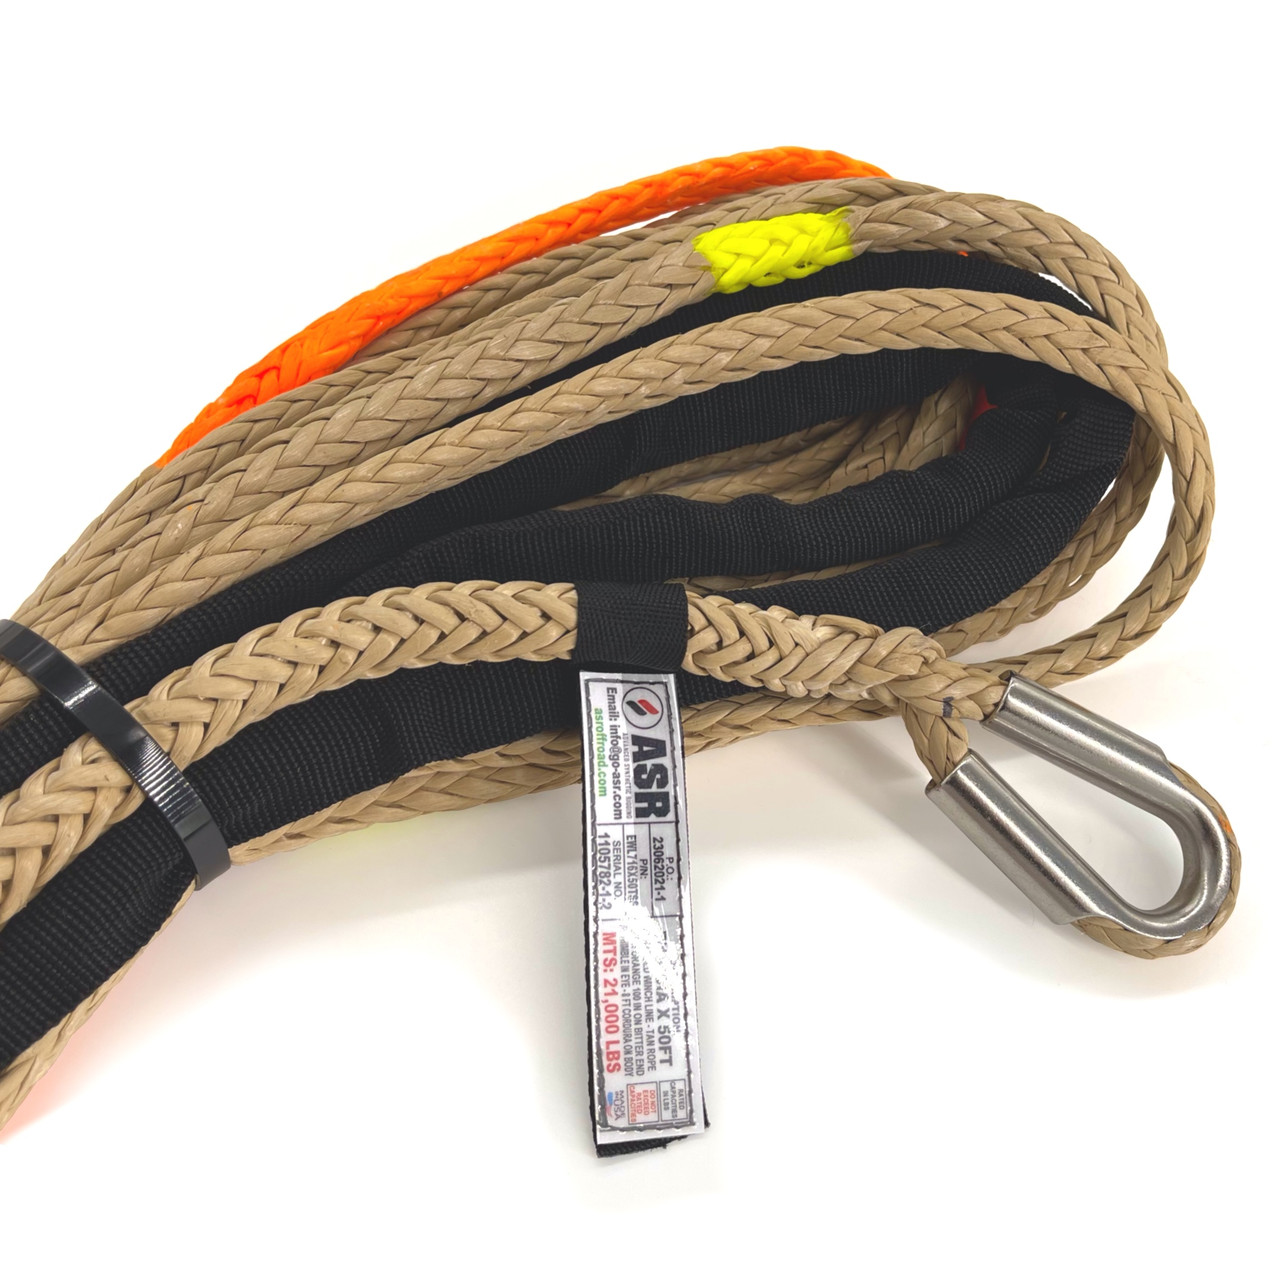 Vulcan PROSeries Synthetic Rope Winch Lines